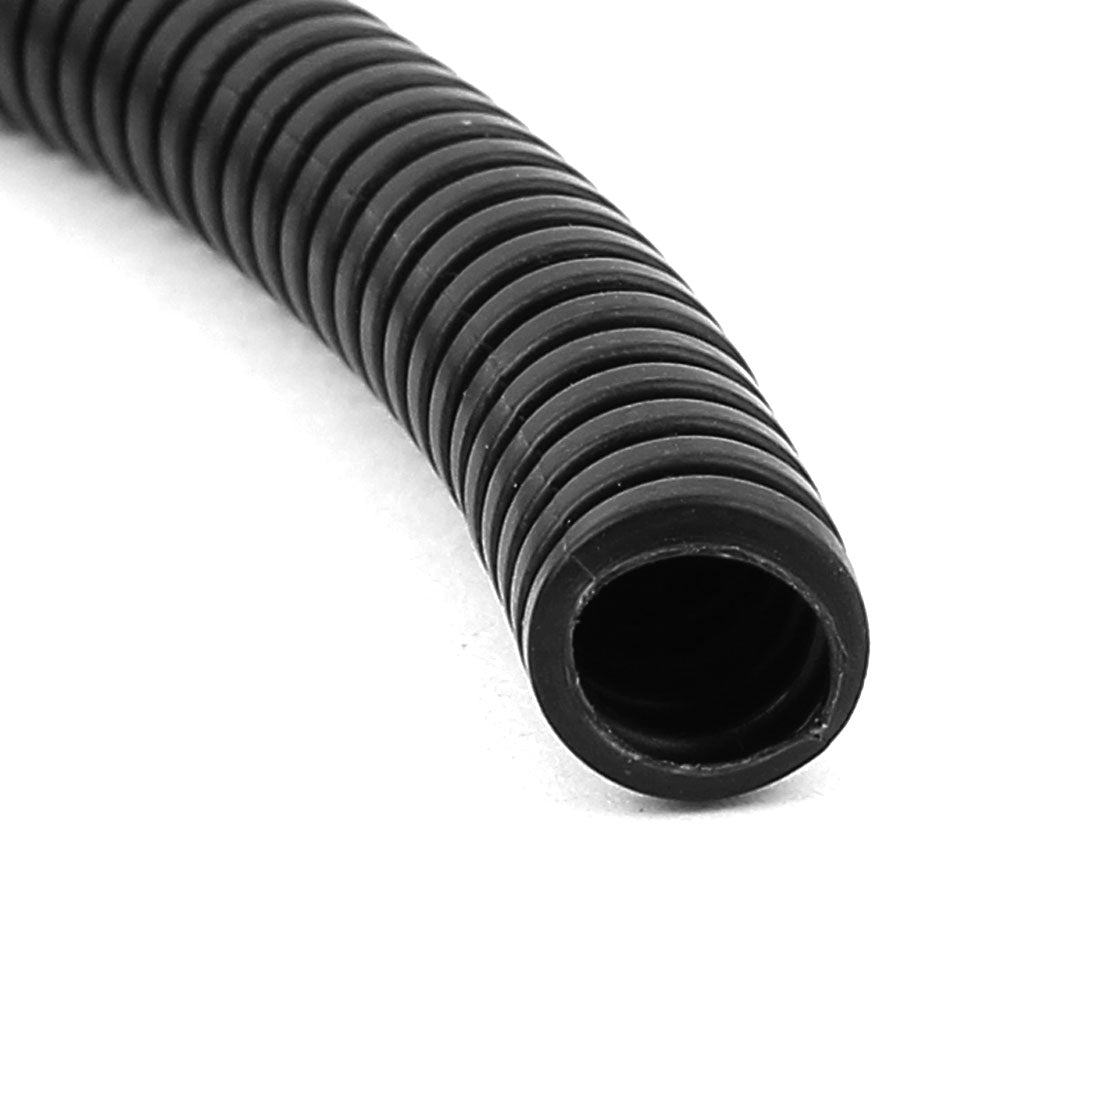 uxcell Uxcell 1.6 M 7 x 10 mm Plastic Flexible Corrugated Conduit Tube for Garden,Office Black